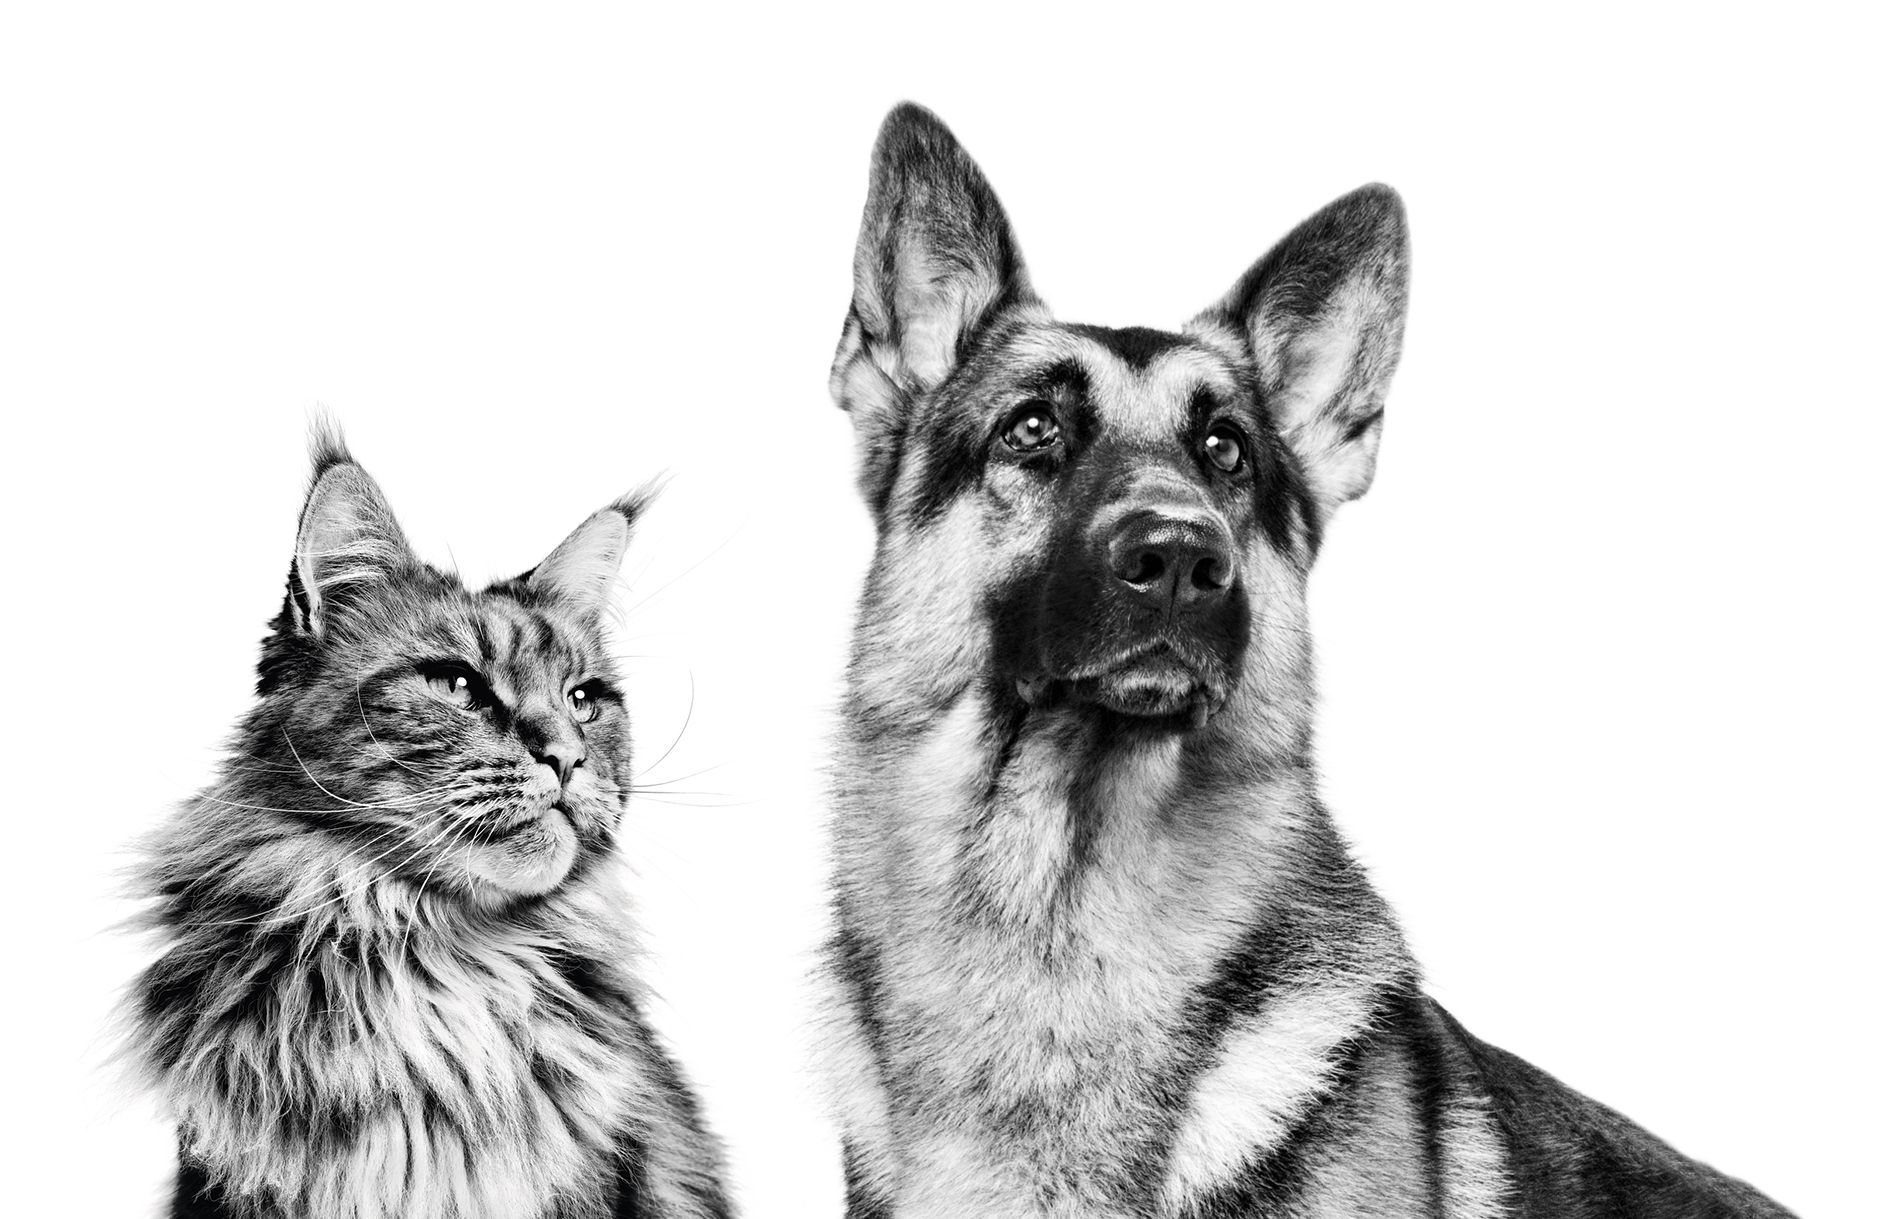 Maine Coon and German Shepherd adults standing in black and white on a white